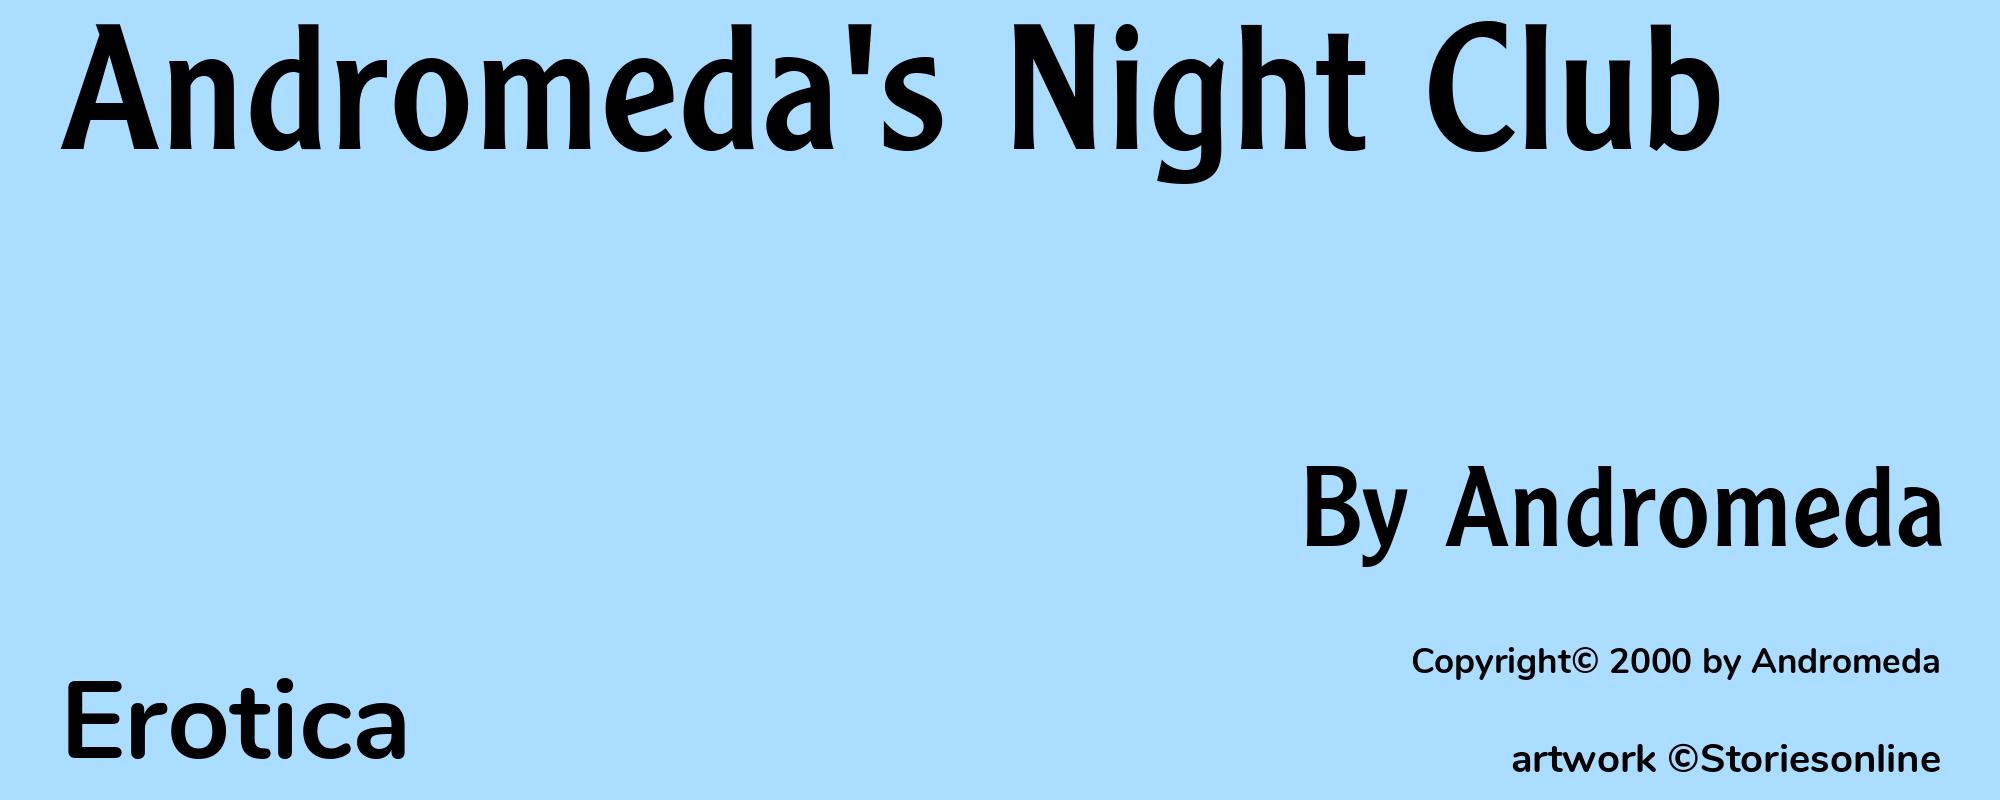 Andromeda's Night Club - Cover